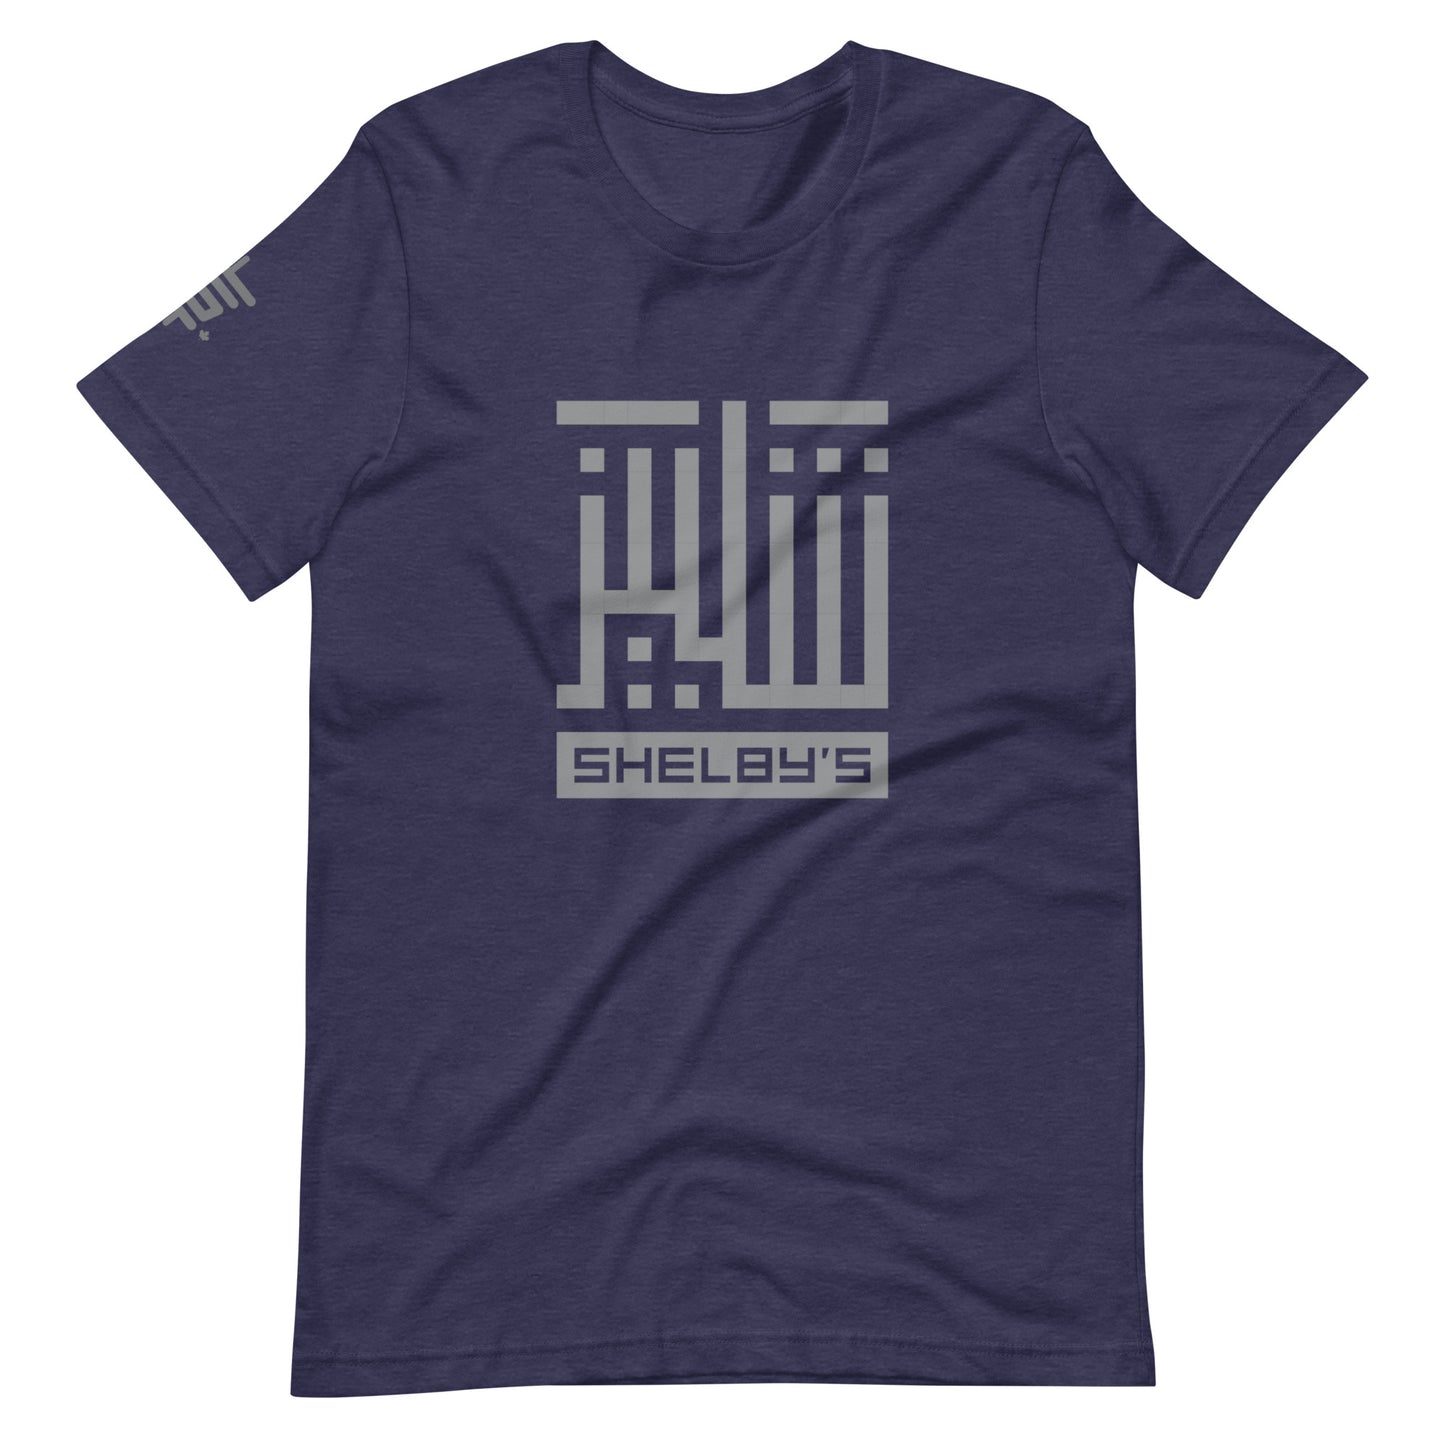 Shelby's Arabic Square - T-shirt